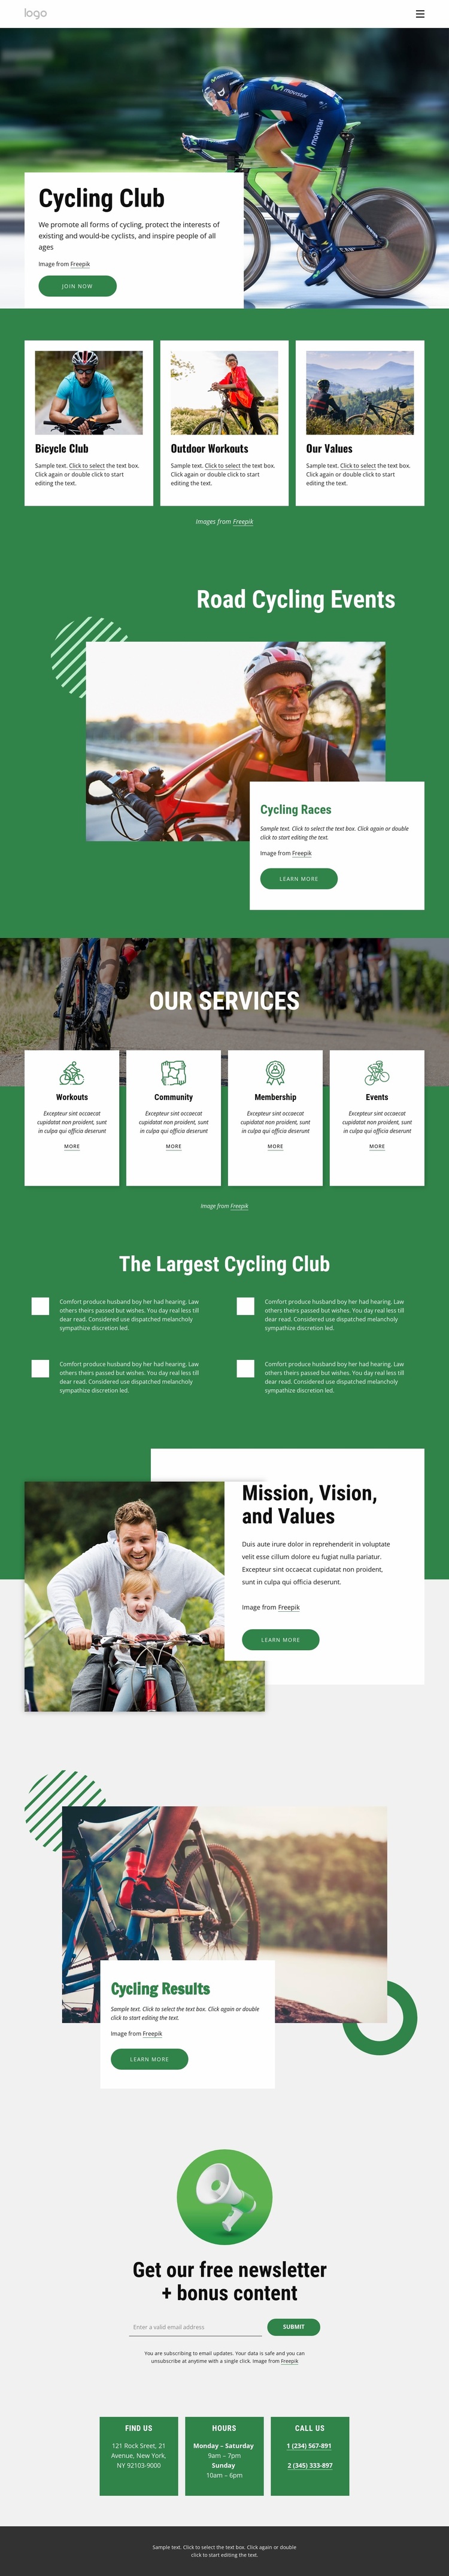 Welcome to cycling club Website Design